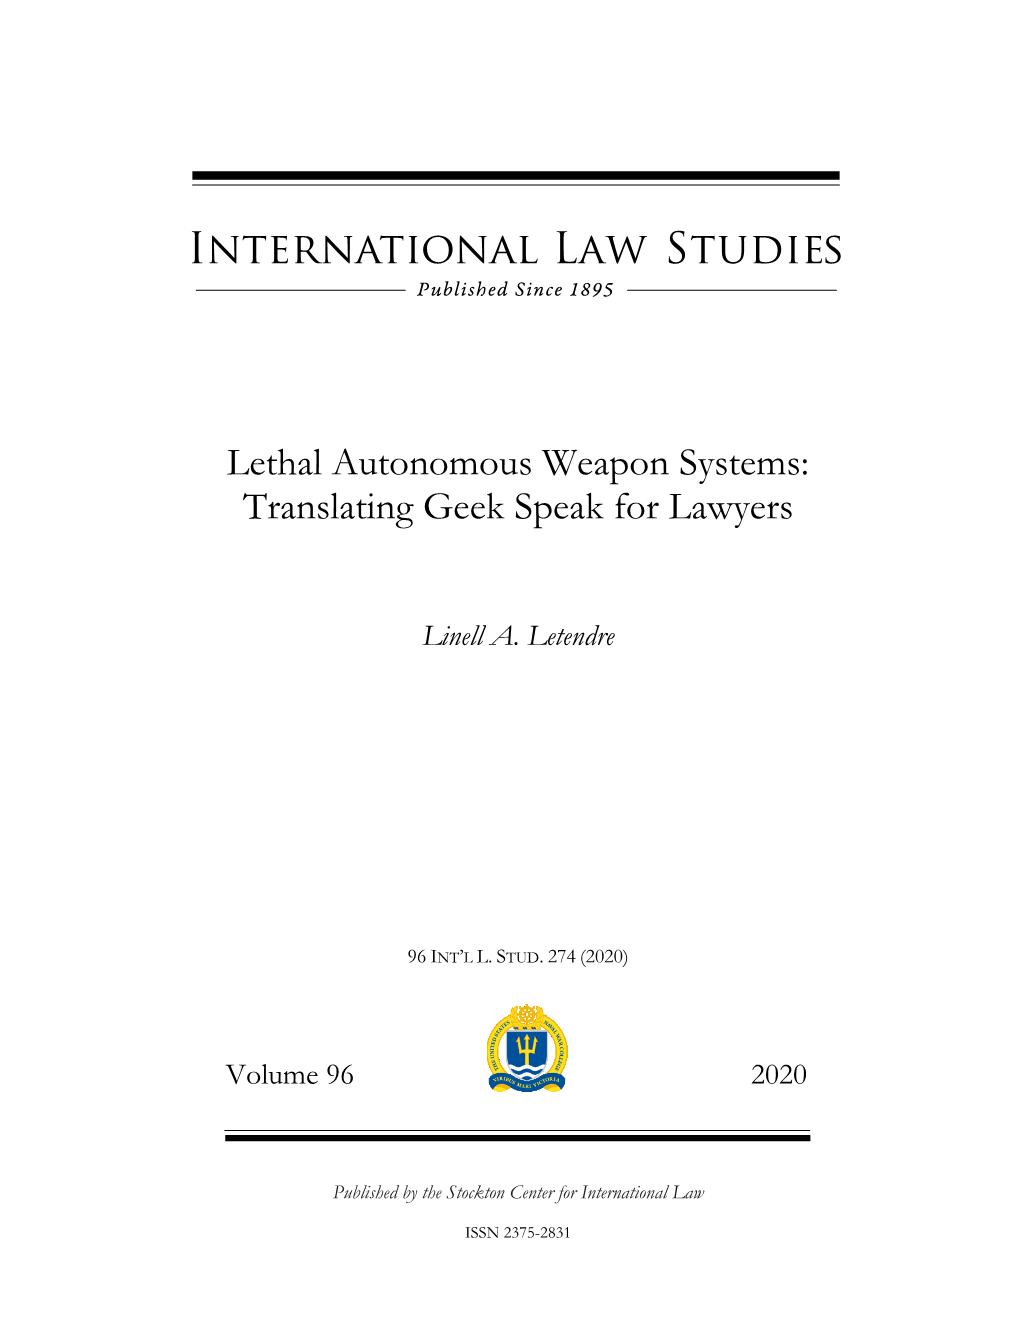 Lethal Autonomous Weapon Systems: Translating Geek Speak for Lawyers